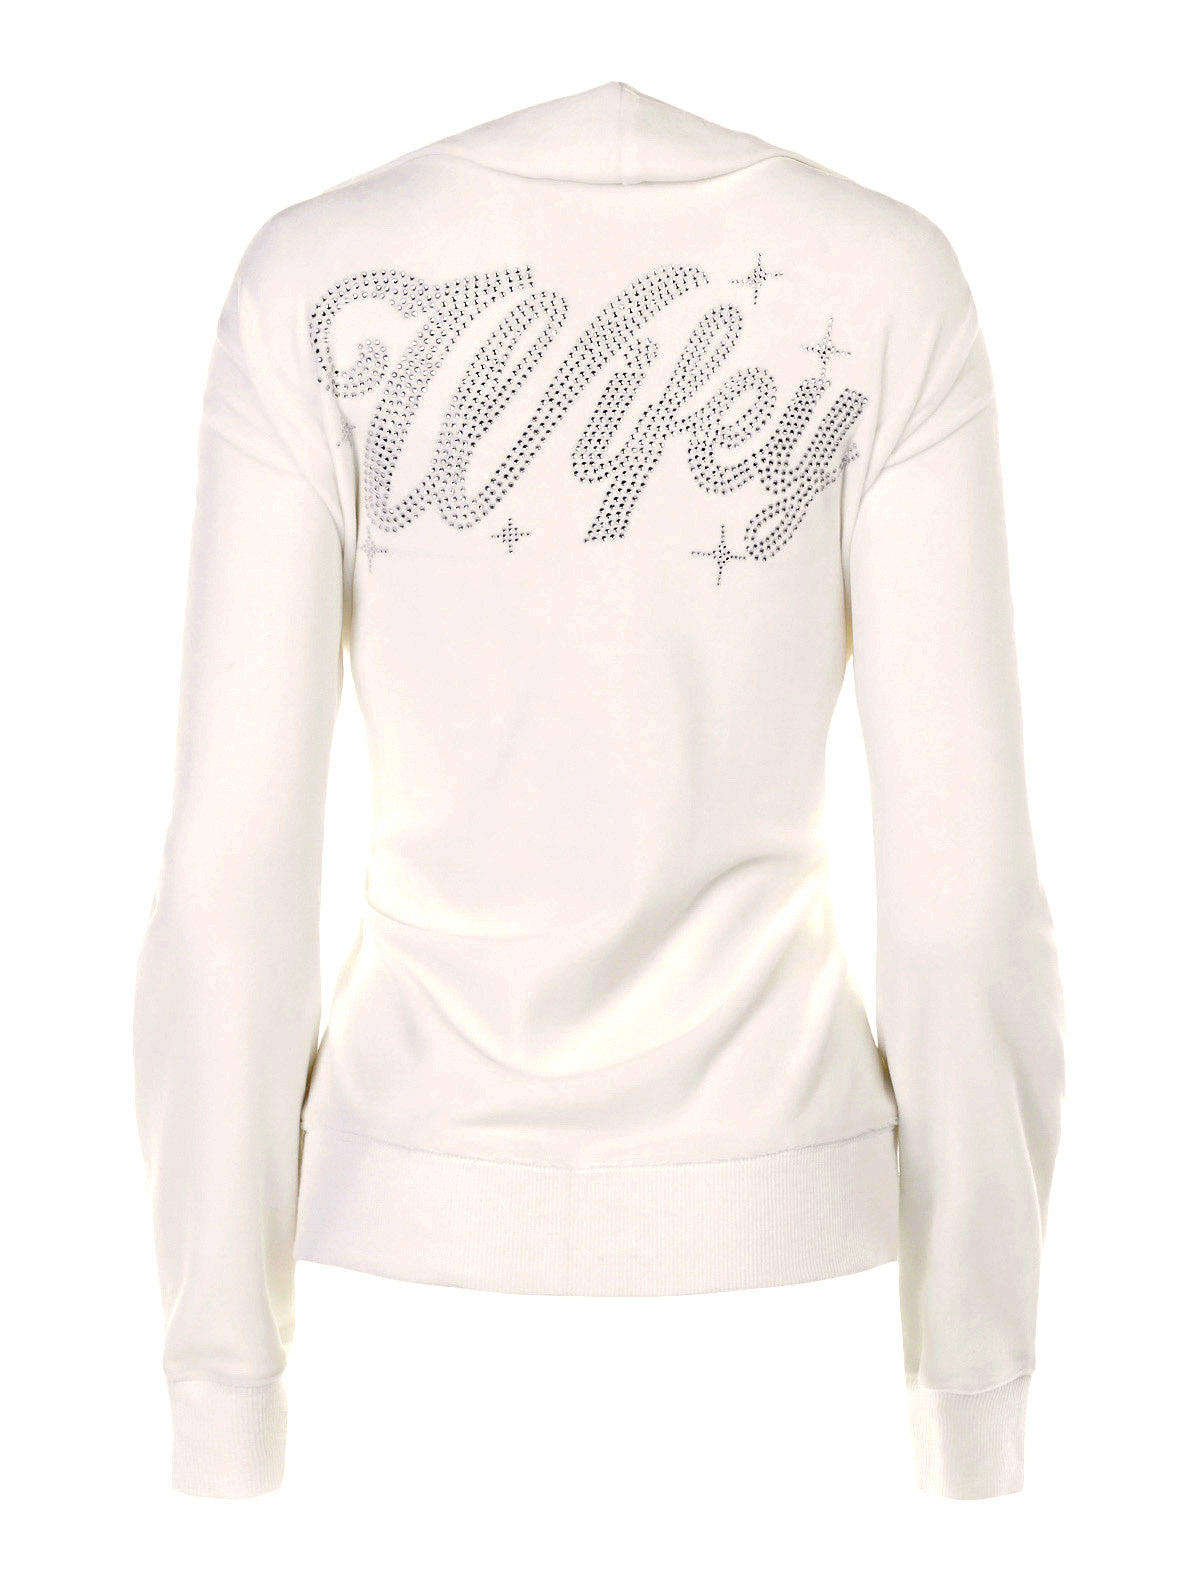 Wifey for Lifey Hoodie